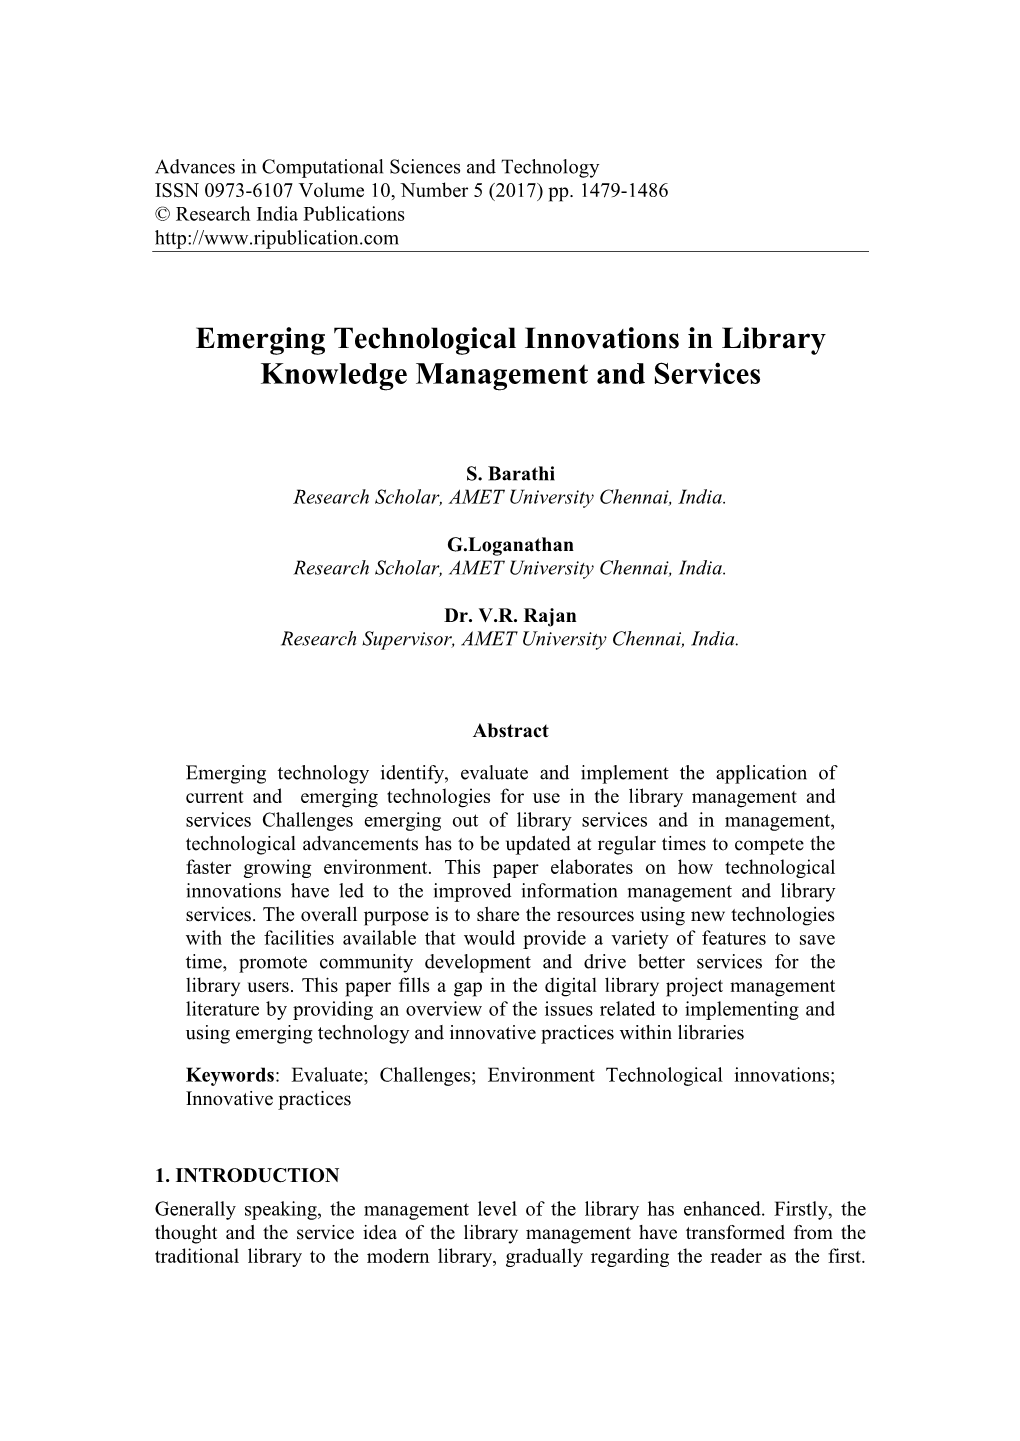 Emerging Technological Innovations in Library Knowledge Management and Services